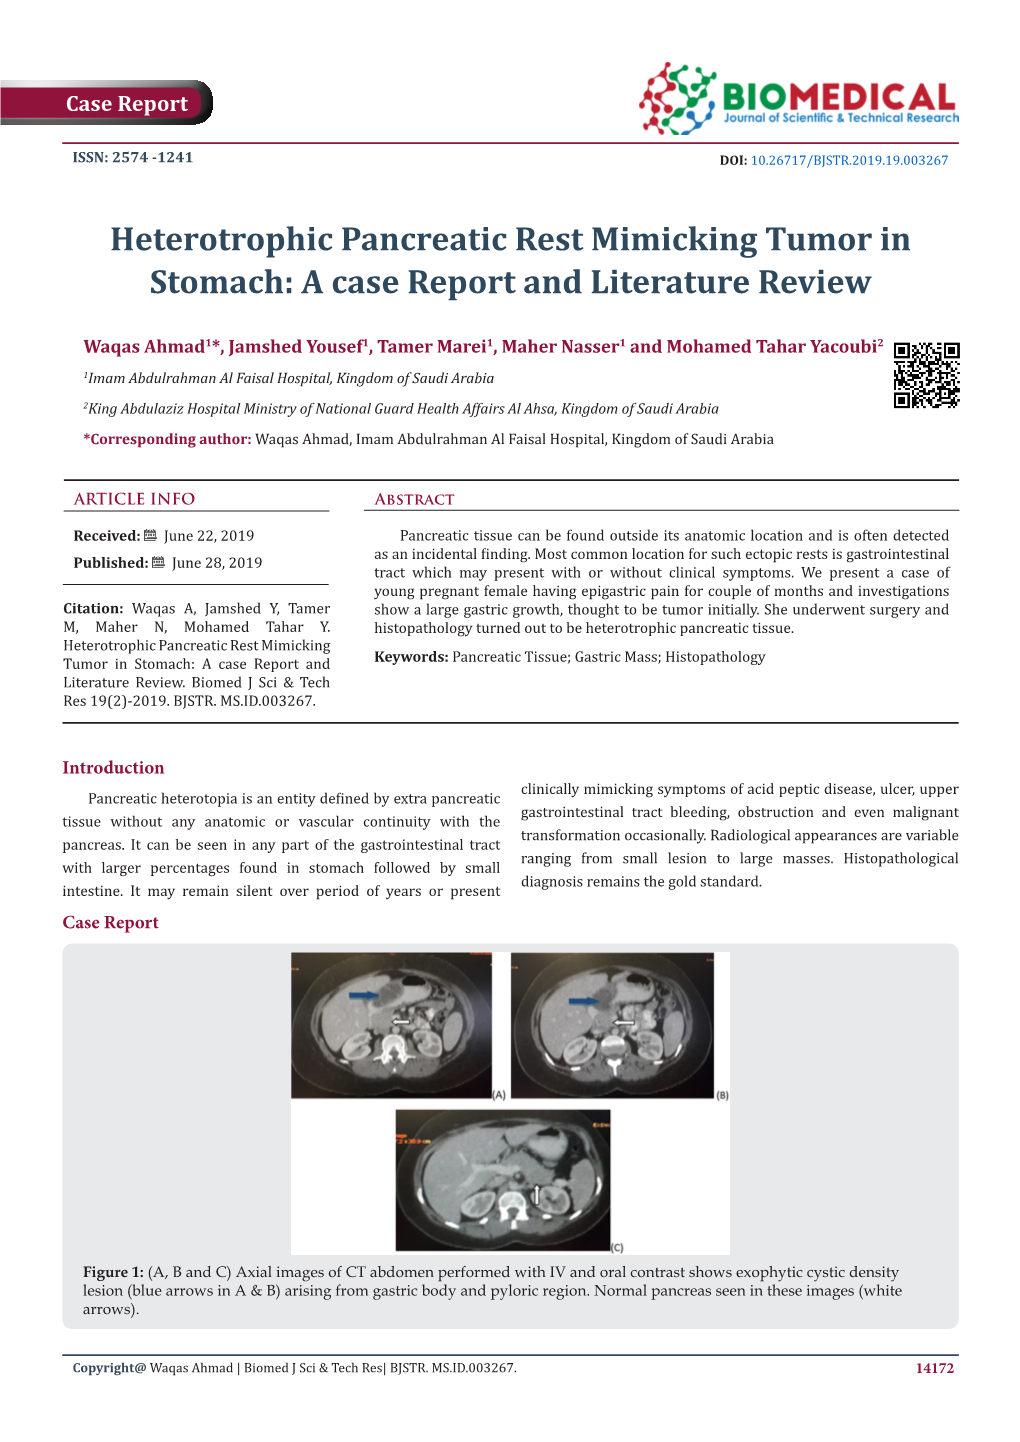 Heterotrophic Pancreatic Rest Mimicking Tumor in Stomach: a Case Report and Literature Review